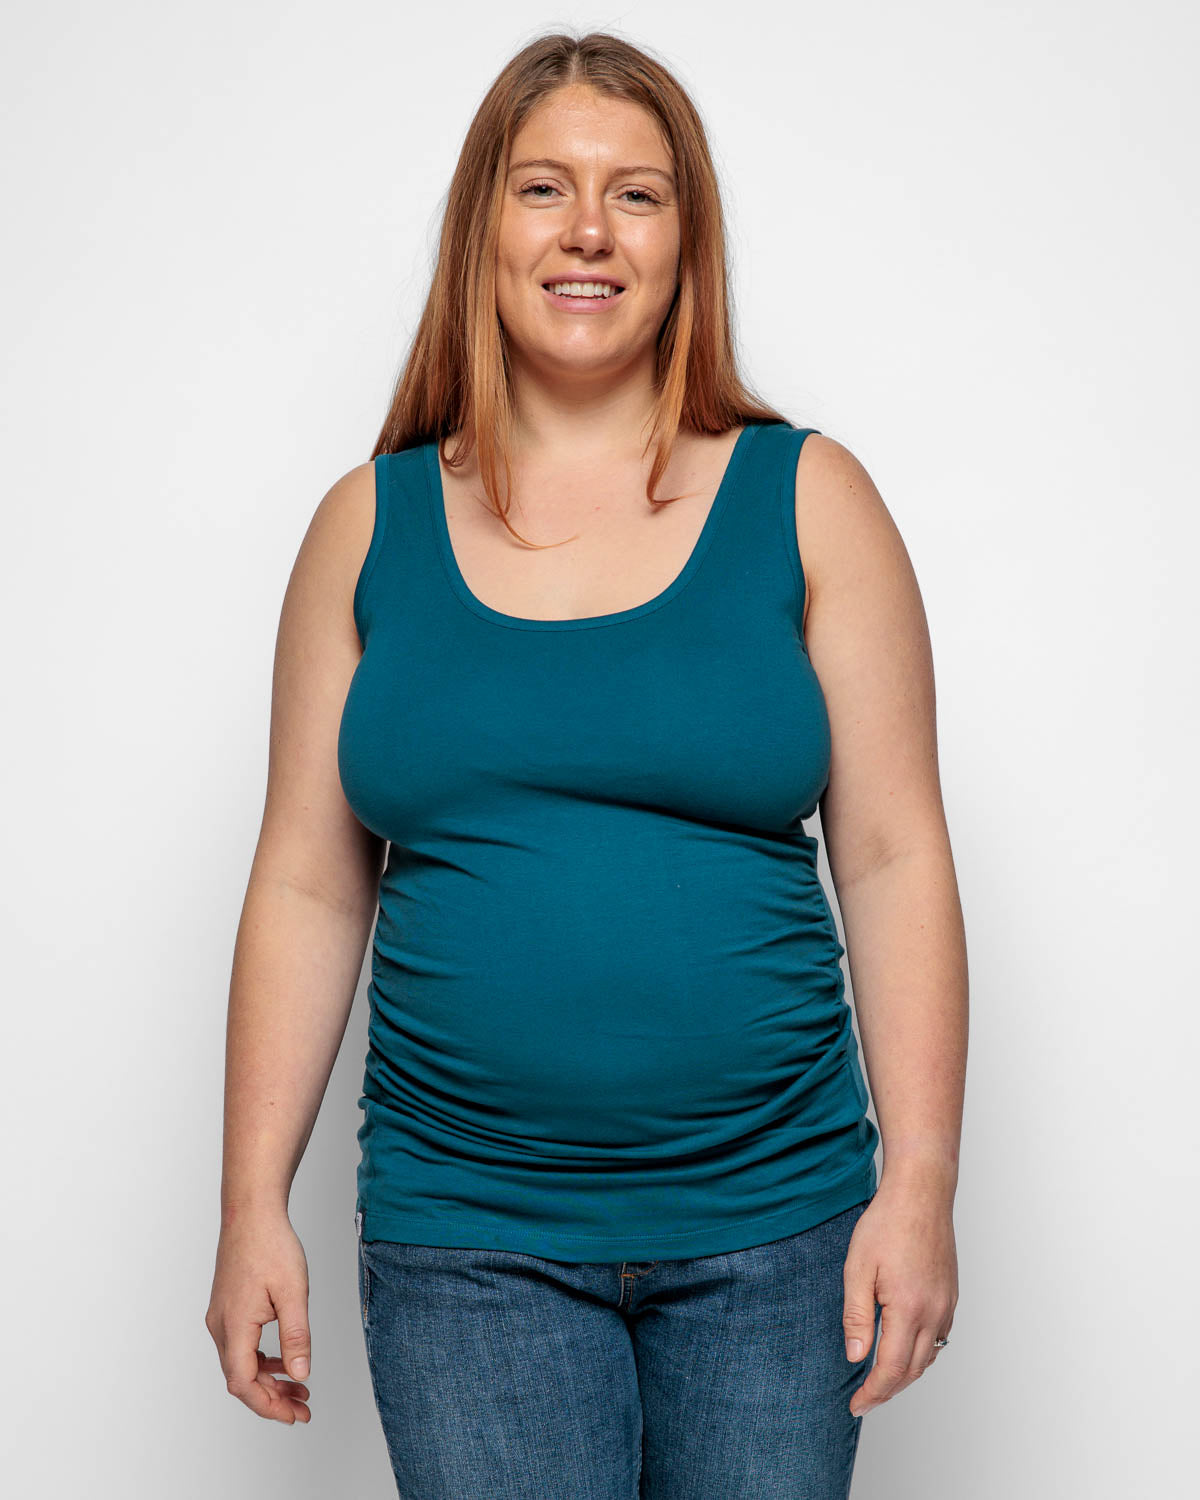 Maternity Vest Top in Teal Organic Cotton for pregnancy